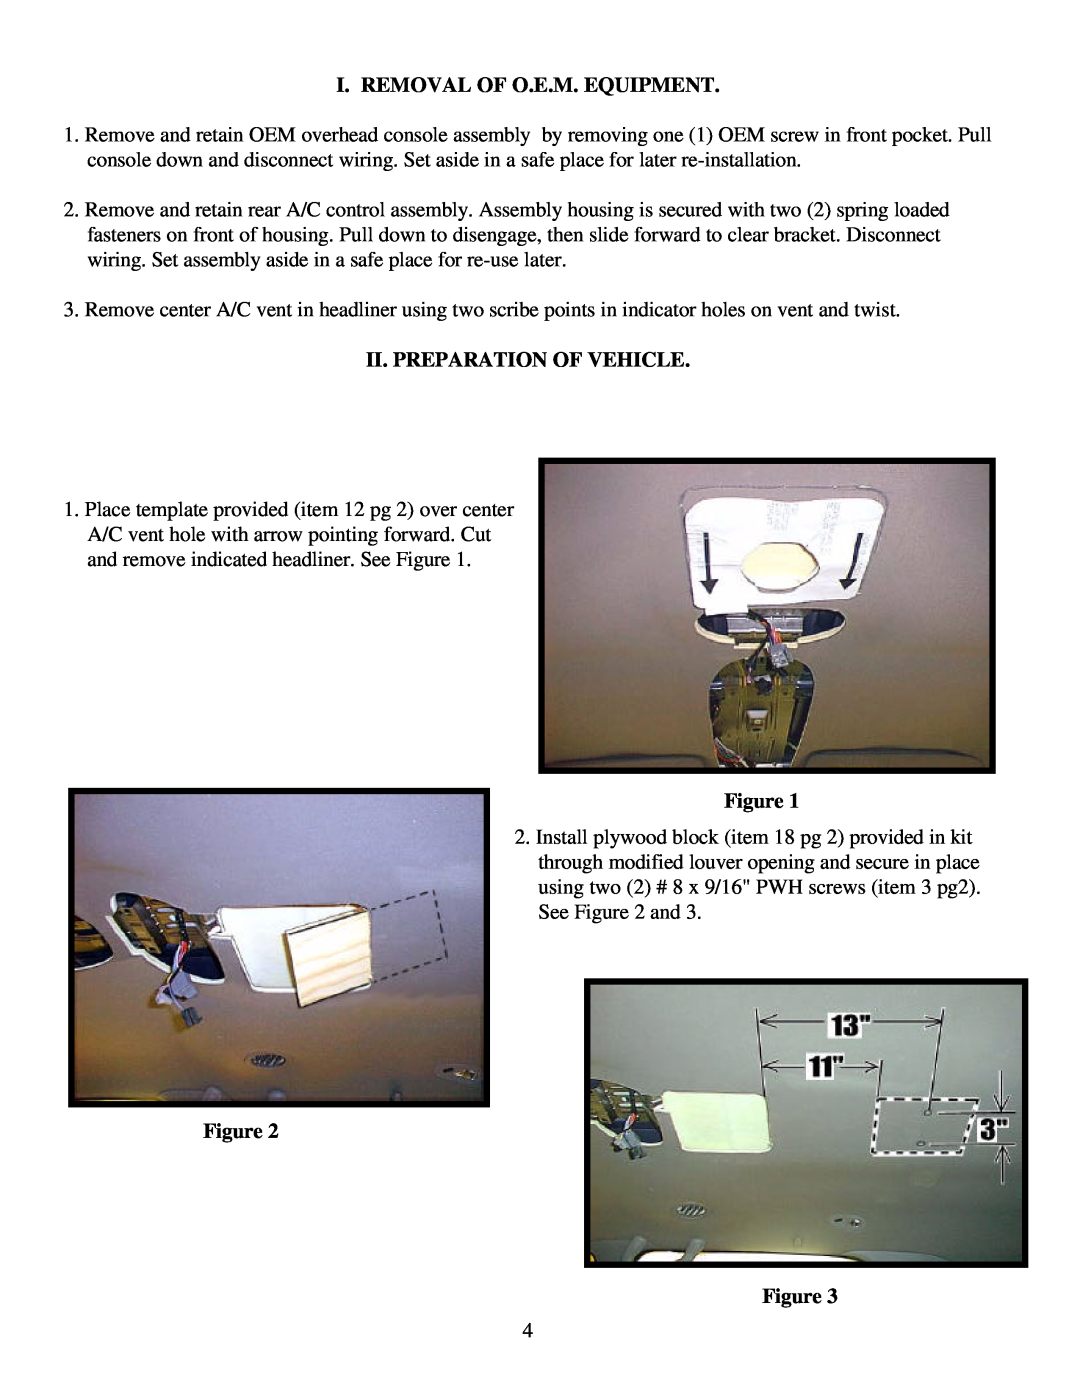 Carson Optical 1181280, 1181281 installation instructions I. Removal Of O.E.M. Equipment, Ii. Preparation Of Vehicle 